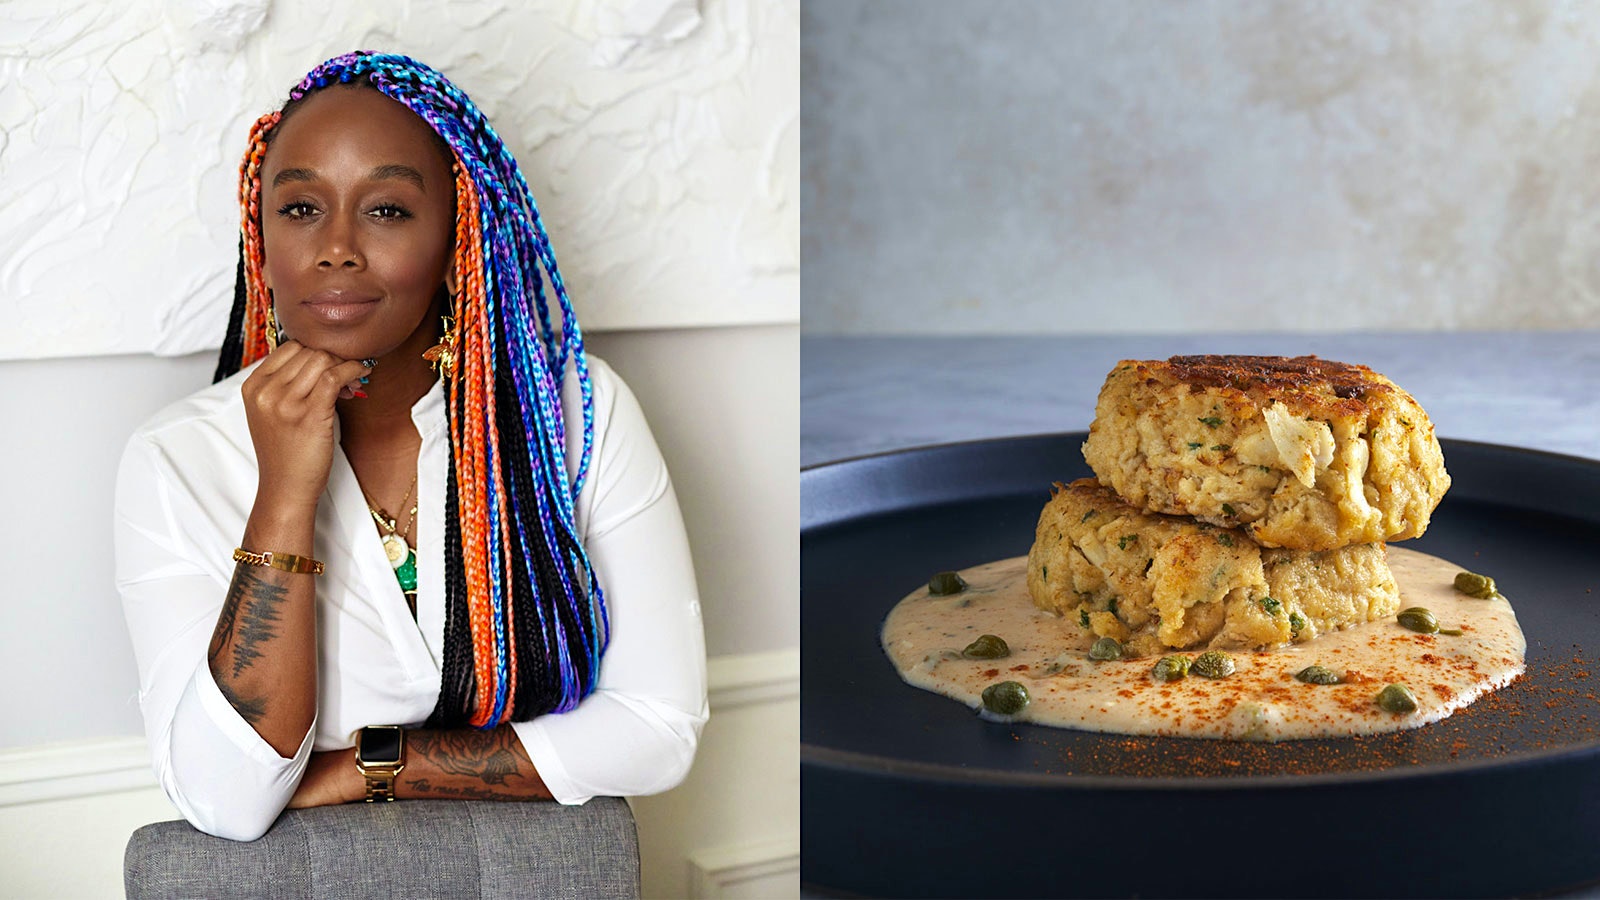  An image of Toya Boudy next to an image of crab cakes